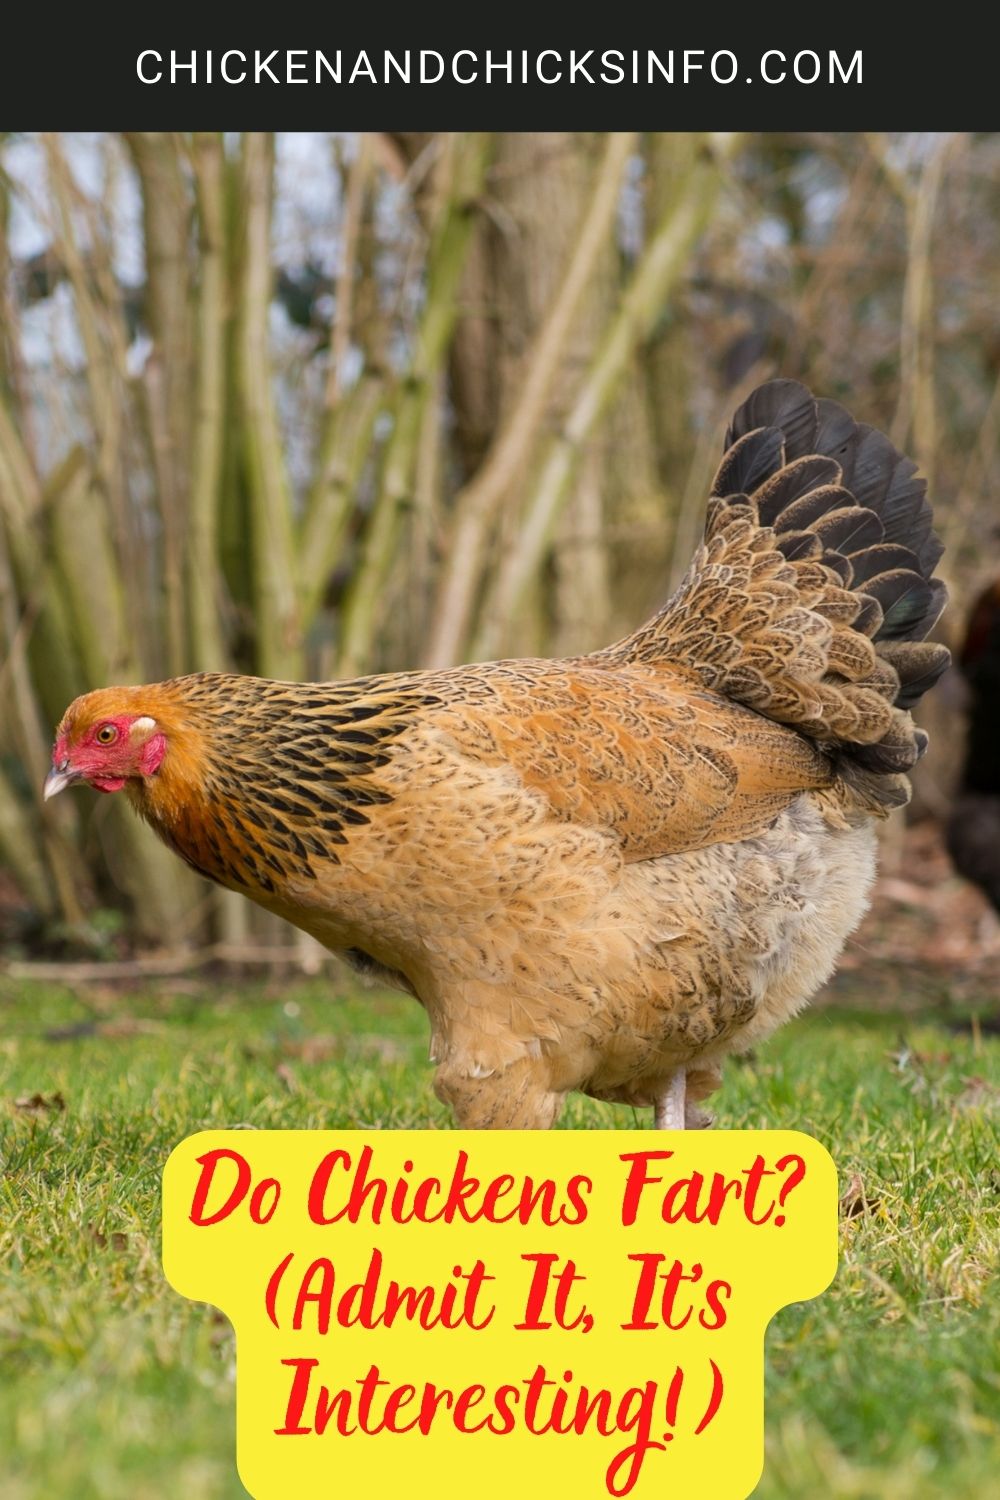 Do Chickens Fart? (Admit It, It's Interesting!) poster.
